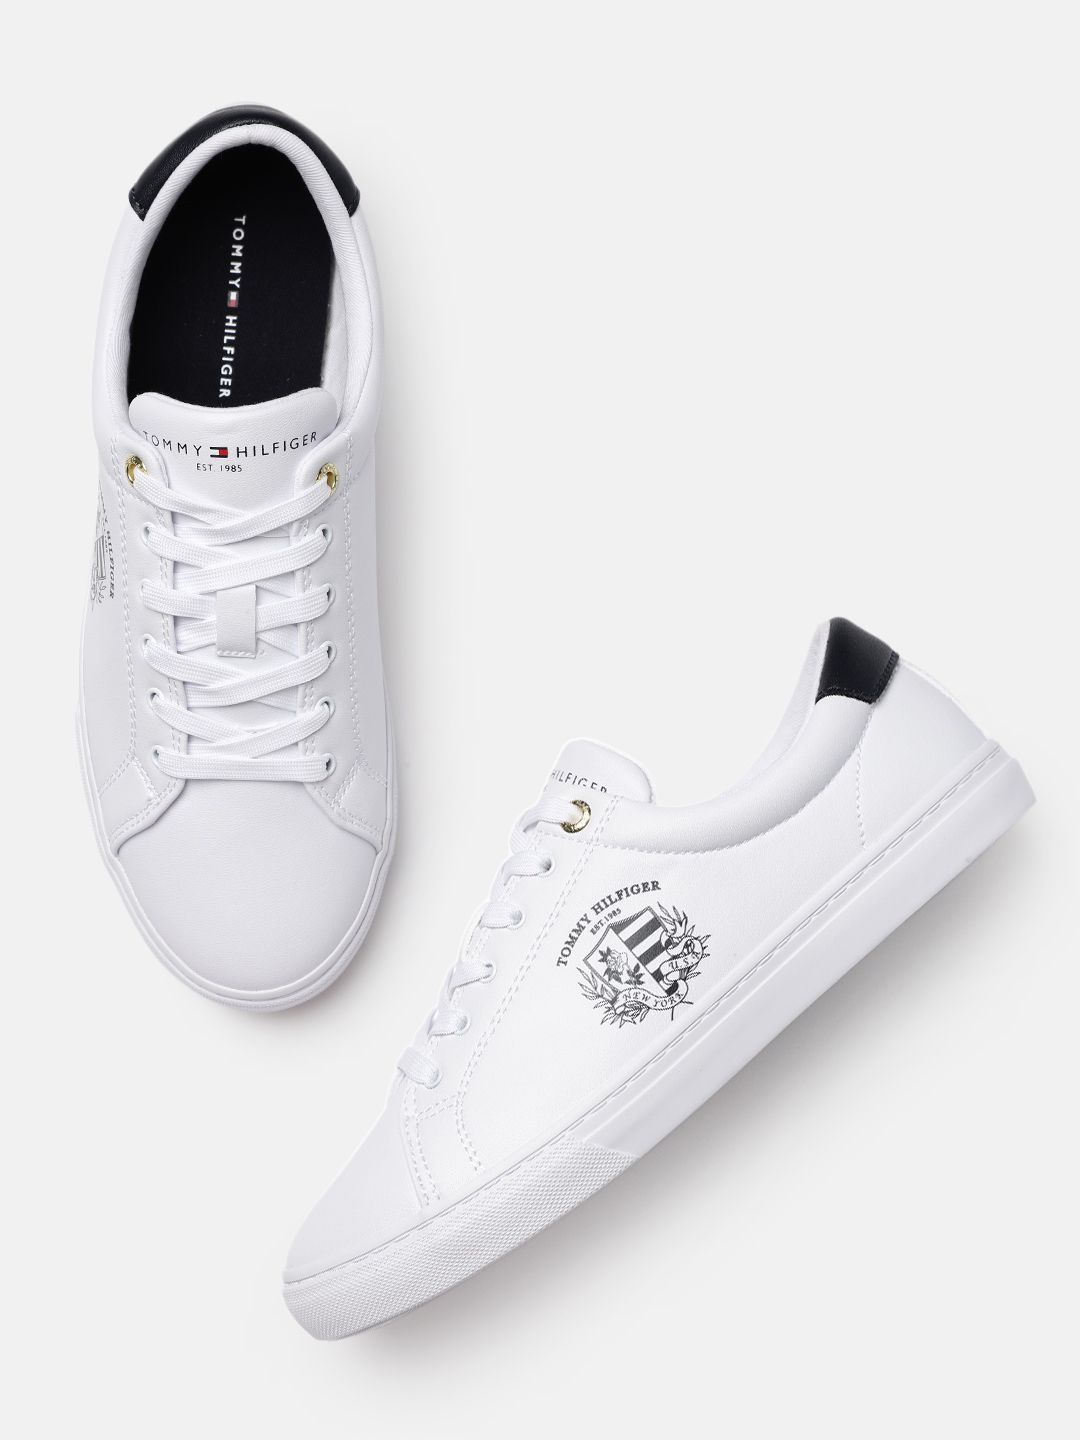 Tommy Hilfiger Women White Solid Regular Sneakers with Brand Logo Print Detail Price in India